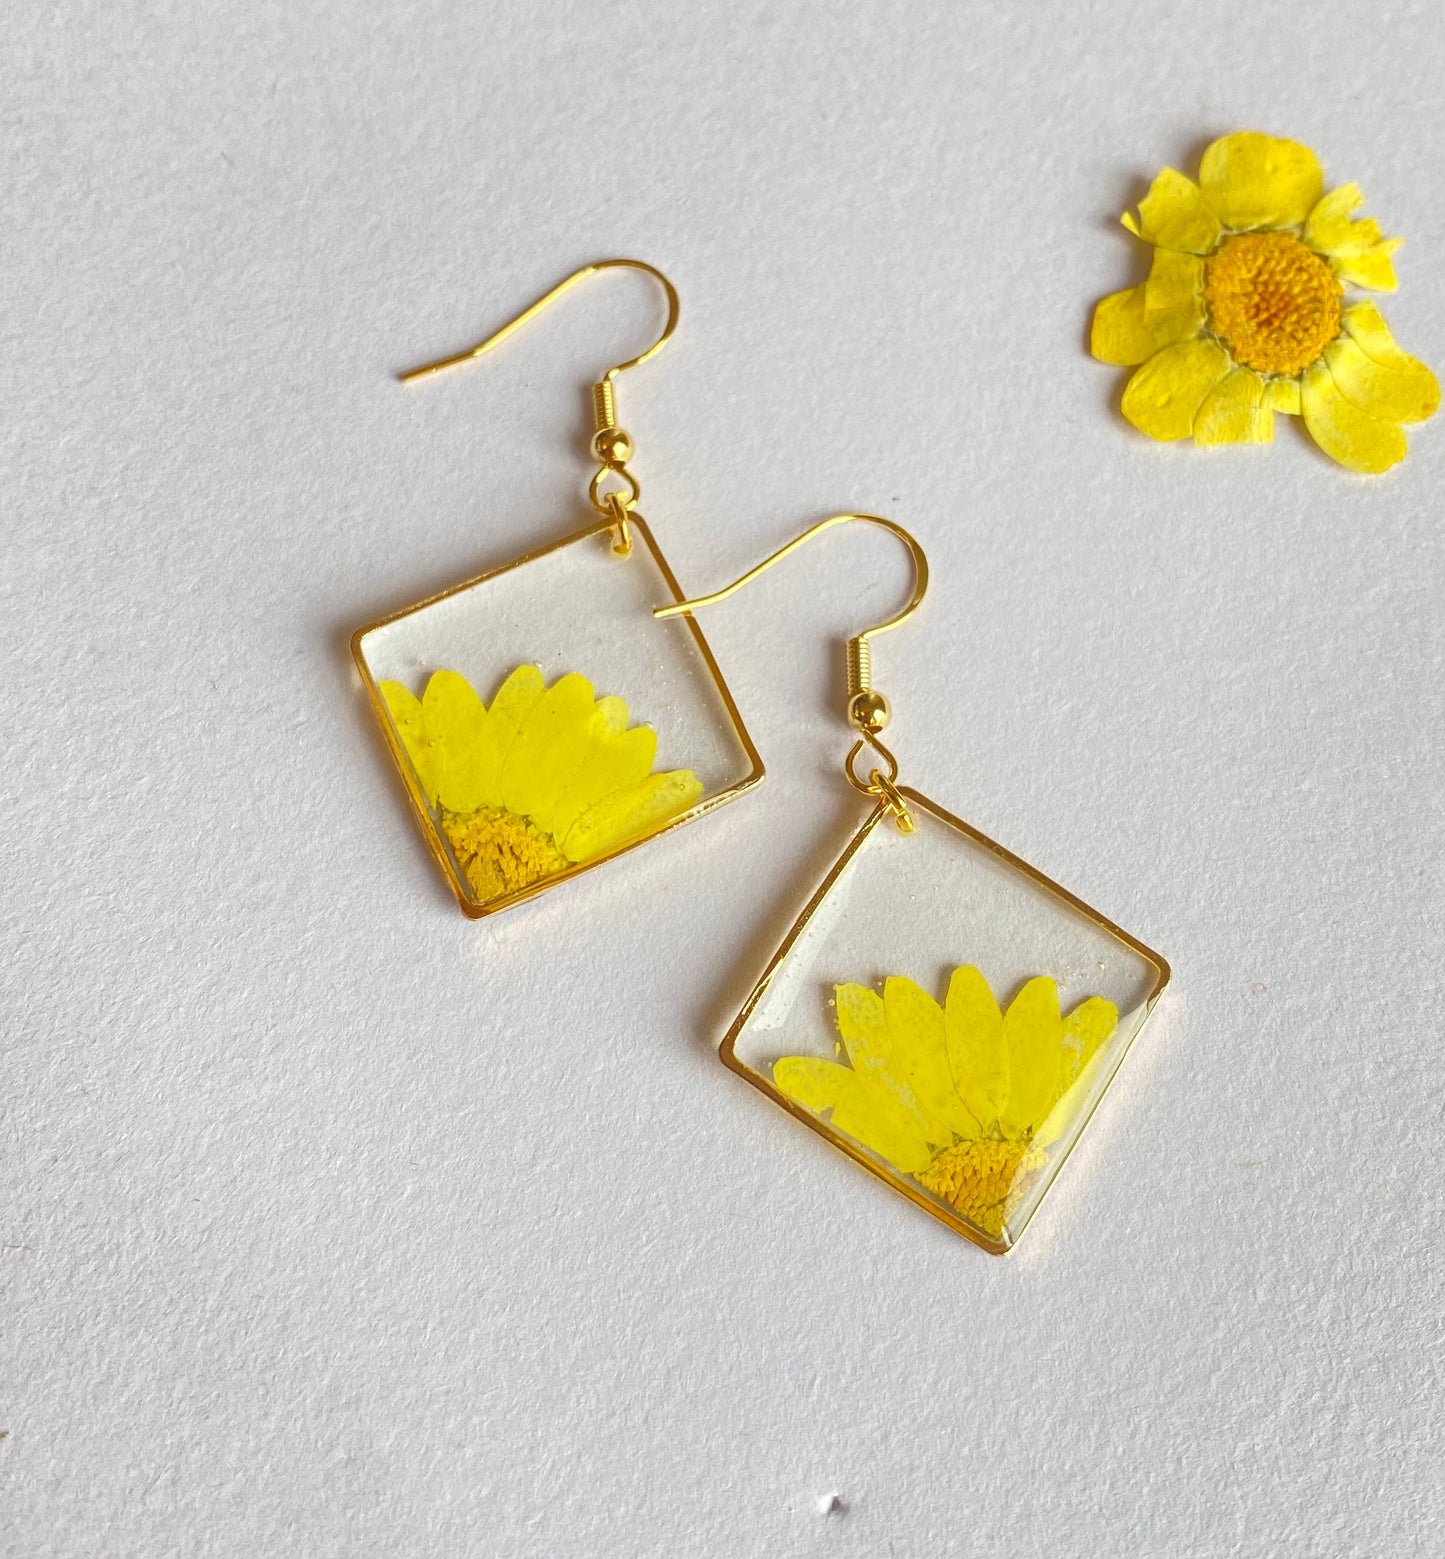 April Birth Flower Daisy Handmade Resin Earrings | Floral Pressed Chrysanthemum Jewelry In White | Blue | Yellow | Orange | Gift for Her